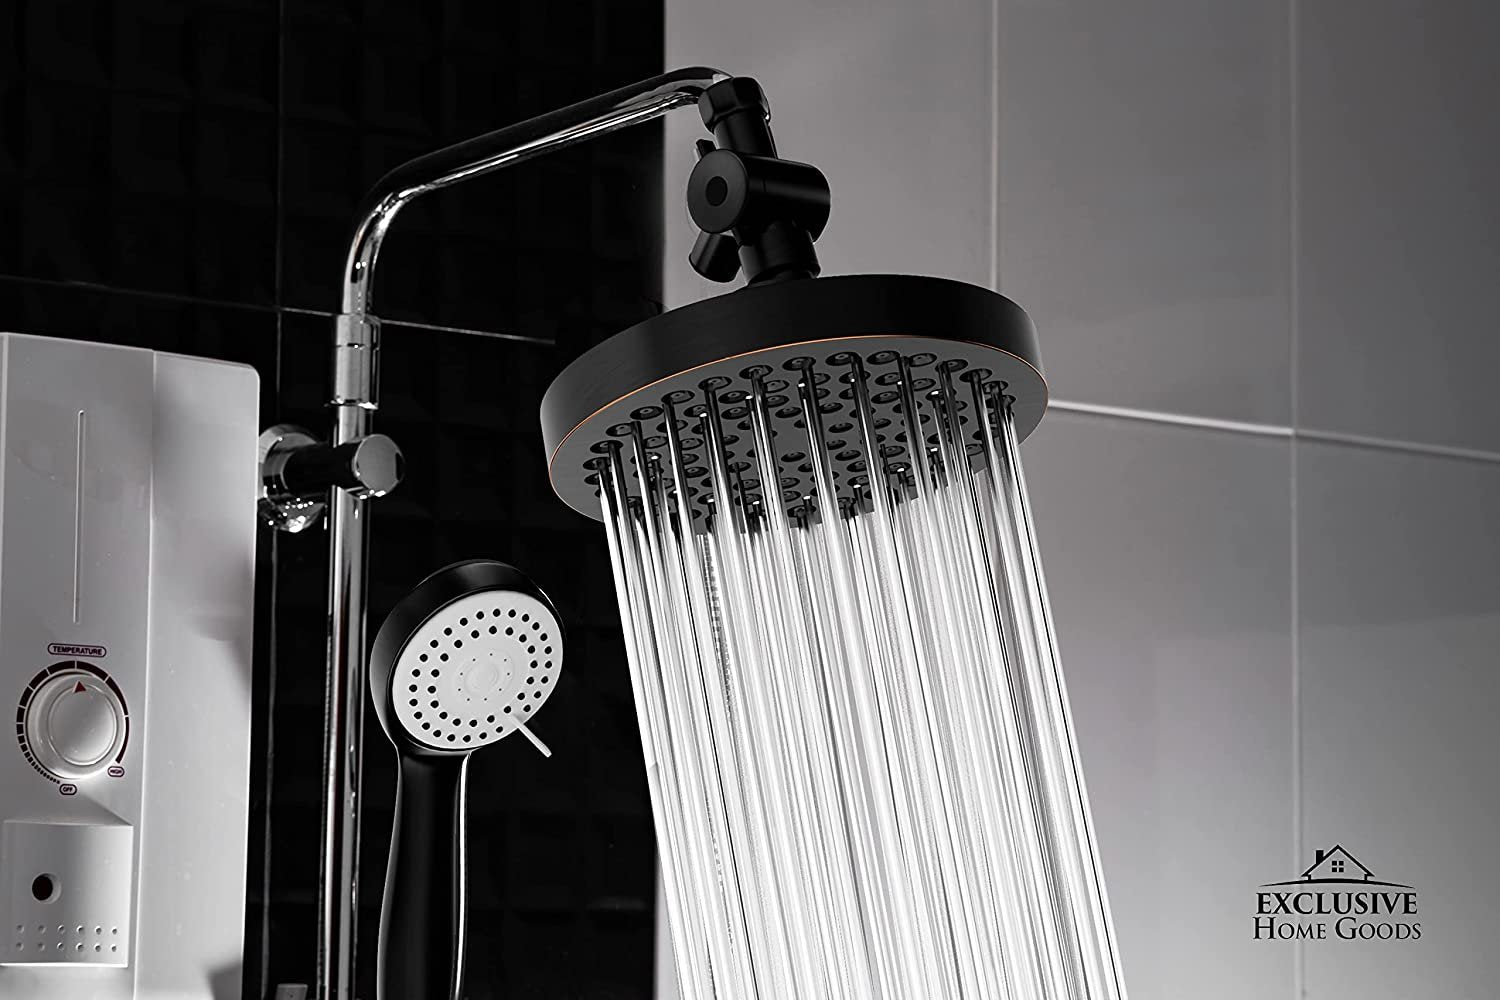 High Pressure Rainfall Shower Head and Hand Held Shower Head Combo with 70 Inch Hose for Bath and Adjustable Swivel Head - Easy Install Anti Clog Jet Nozzles (Brush Nickel)